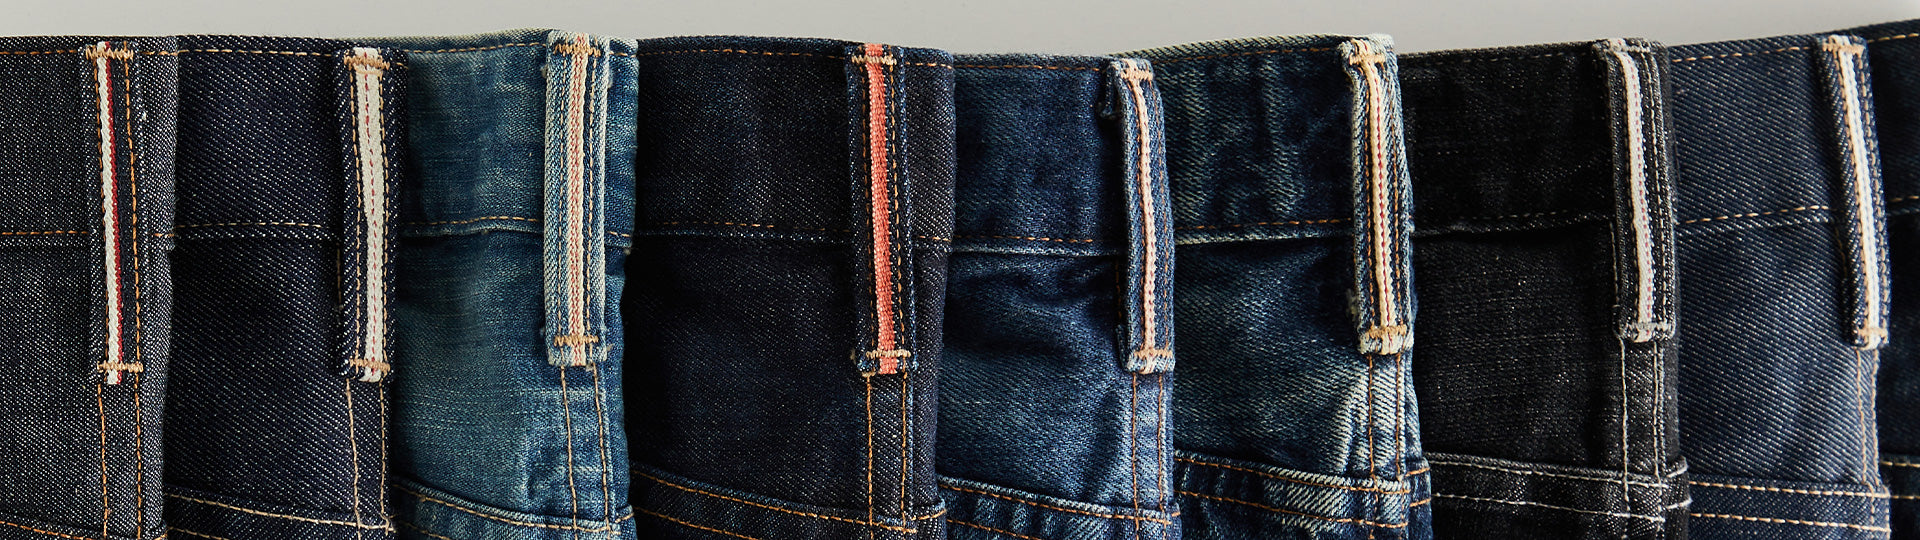 Selvage Denim at AG Jeans Official Store